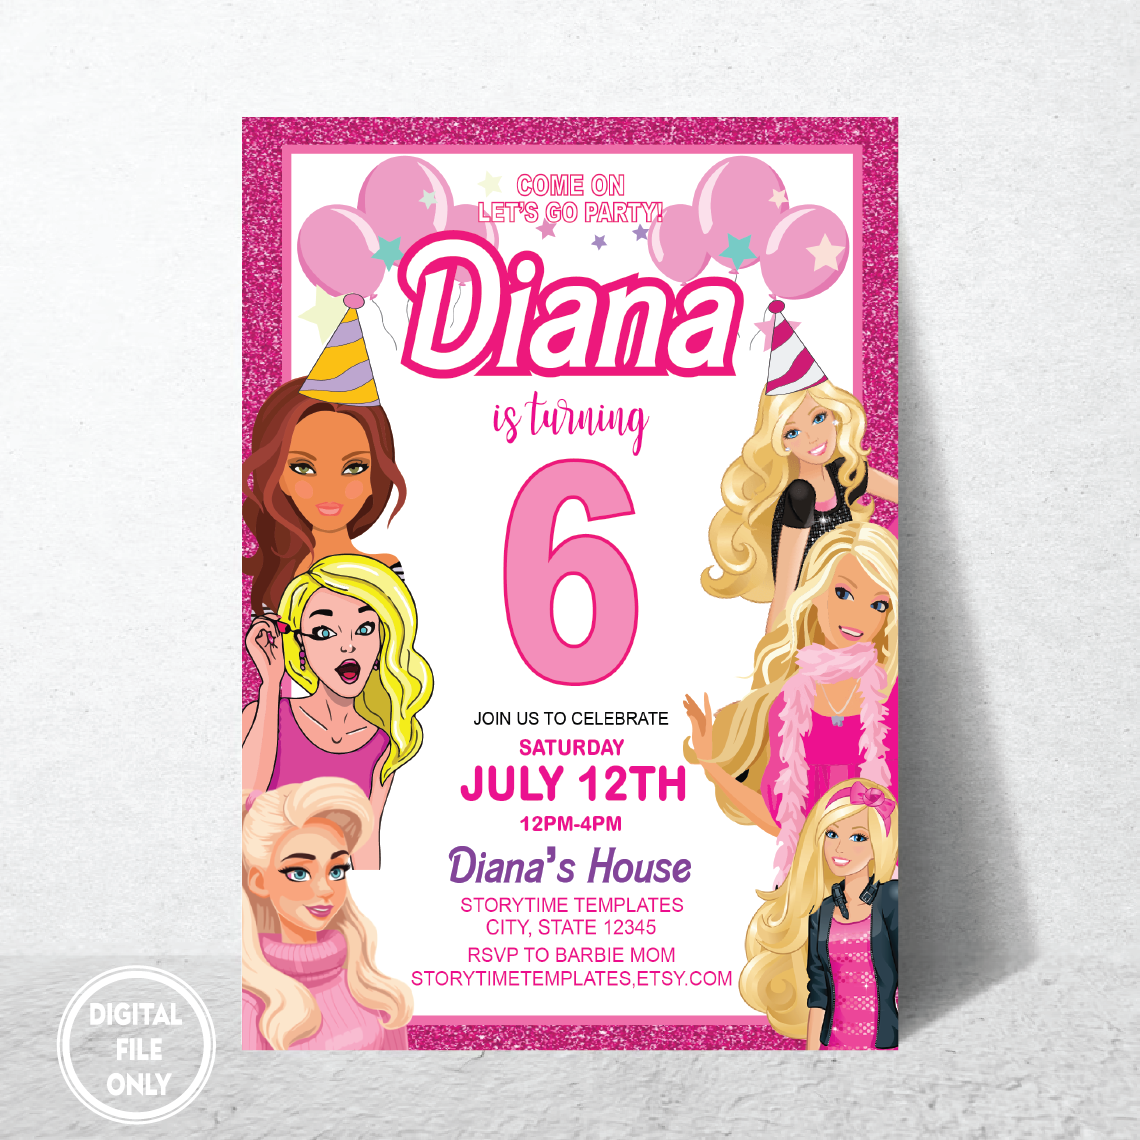 Personalized File Hot Pink Birthday Party Invitation, Pink Doll Party Printable Invitation, Doll Invitation, Digital Birthday Invite, Come on Friends PNG File Only